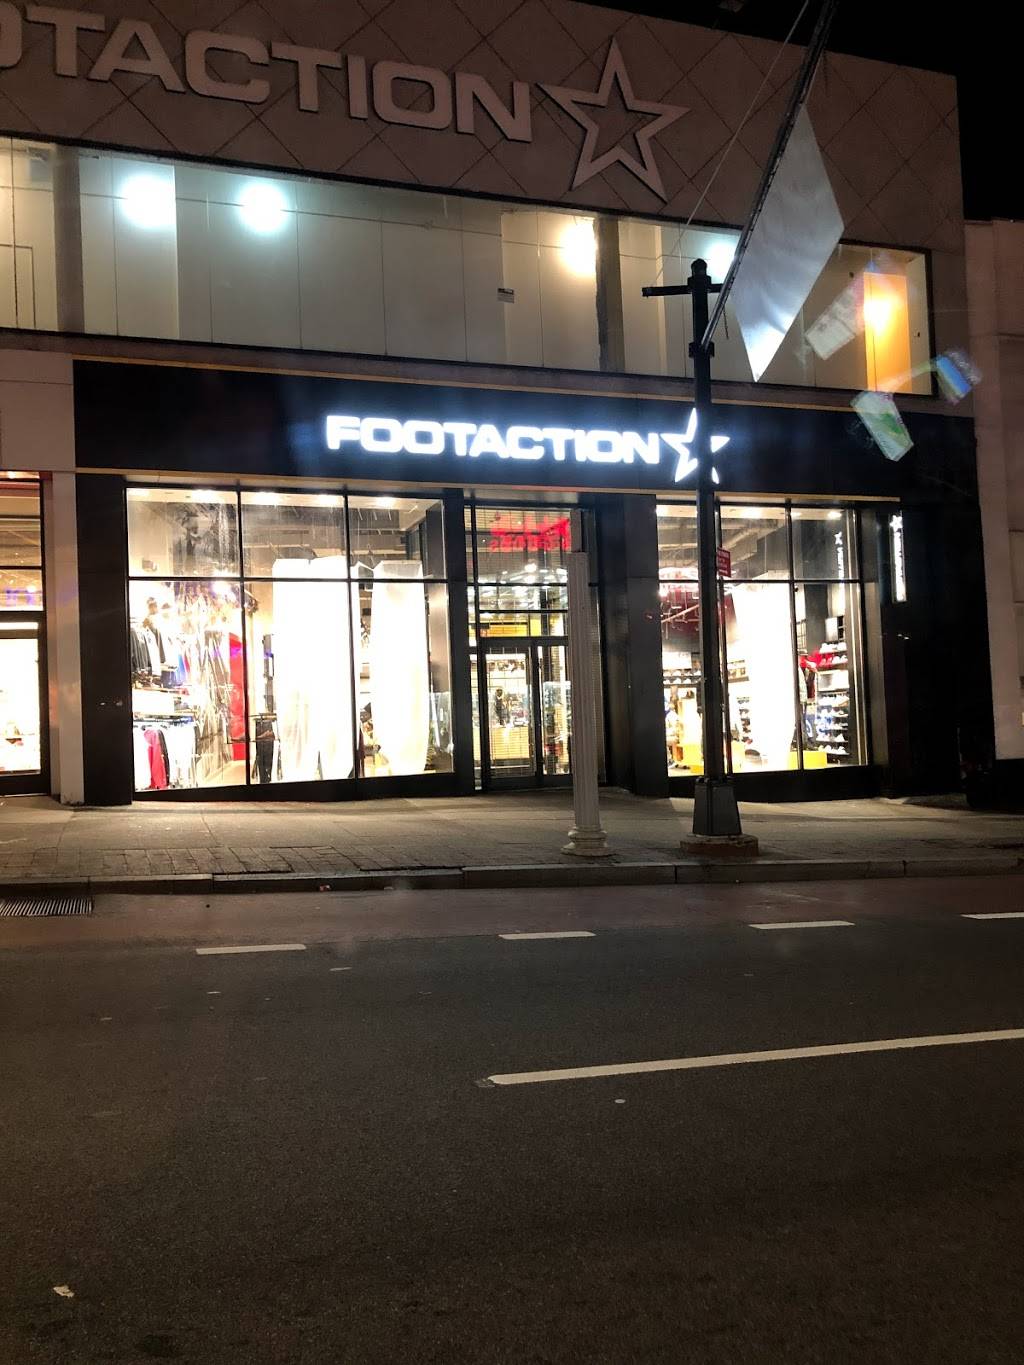 Footaction | 263 E Fordham Rd, The Bronx, NY 10458, USA | Phone: (718) 584-4624